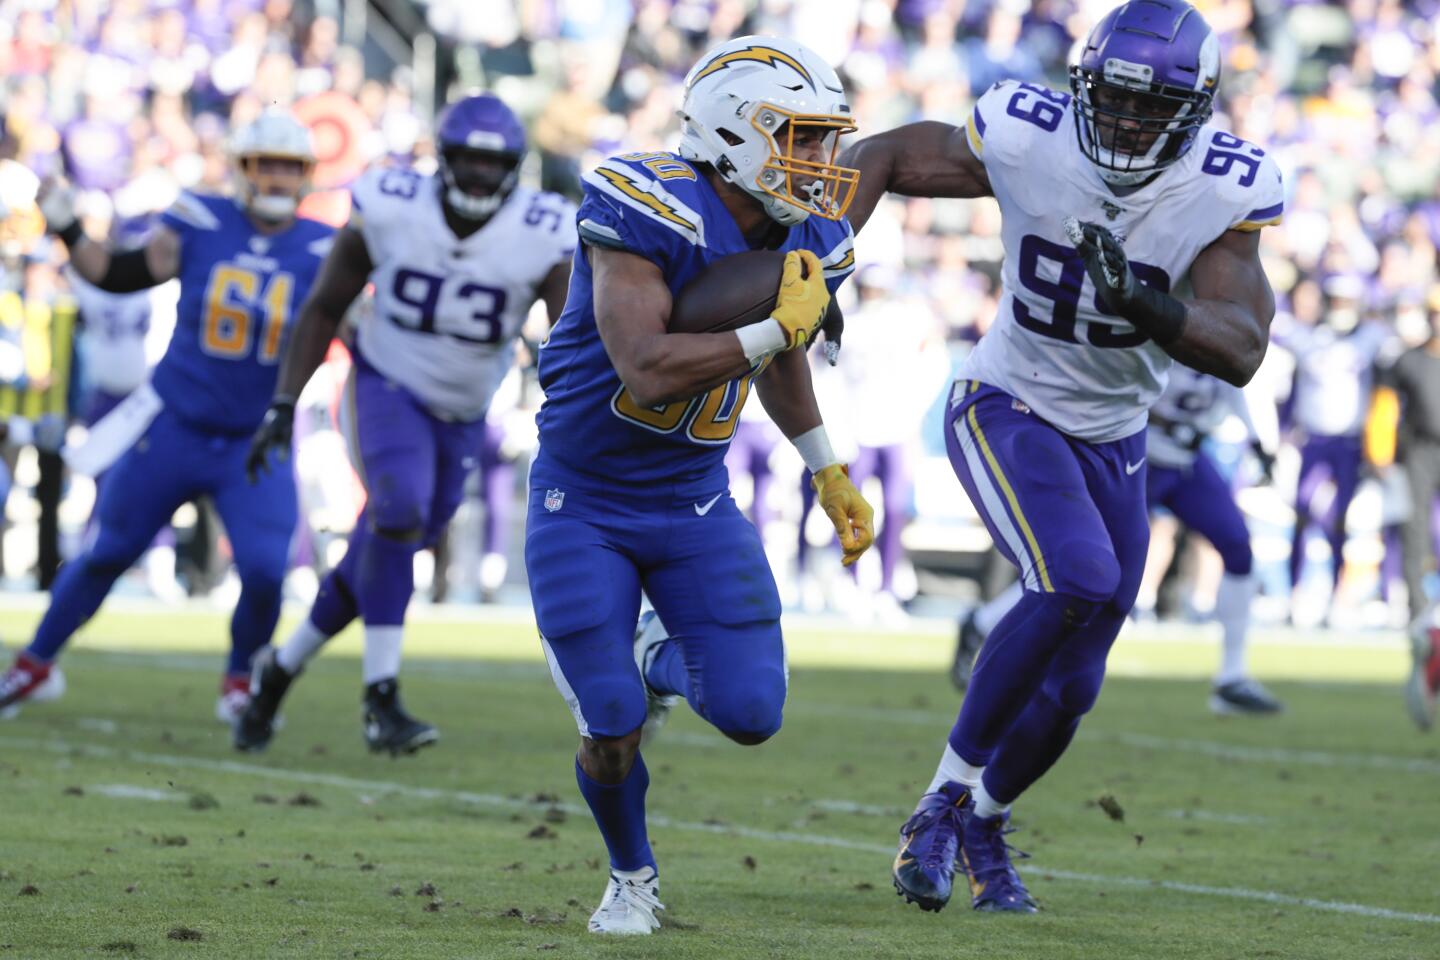 Chargers running back Austin Ekeler tries to outrun Minnesota Vikings defensive end Danielle Hunter.